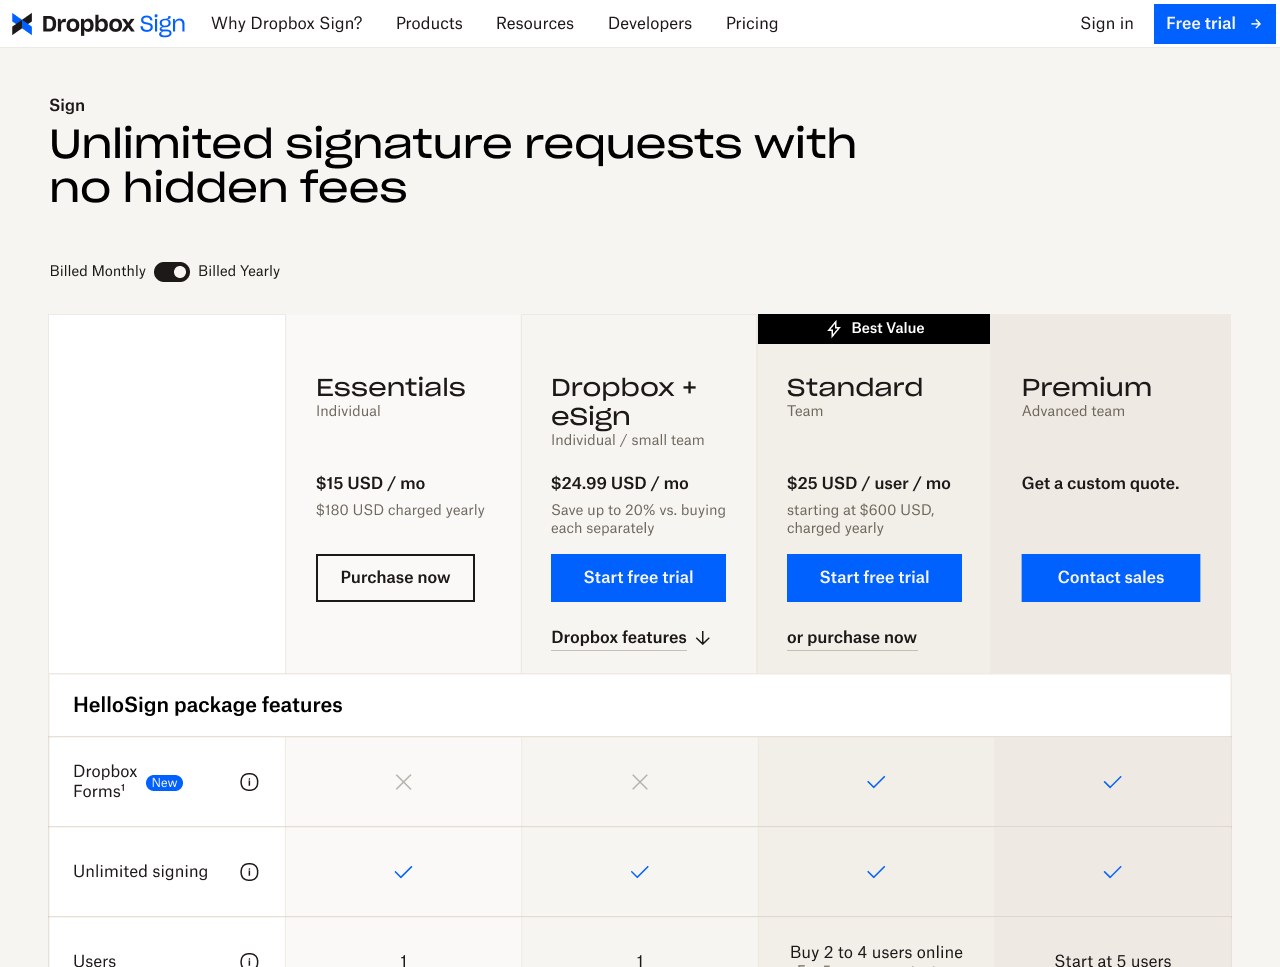 A screenshot of the Dropbox Sign Pricing page that lists out the features, Dropbox + eSign, Standard, and Premium plans